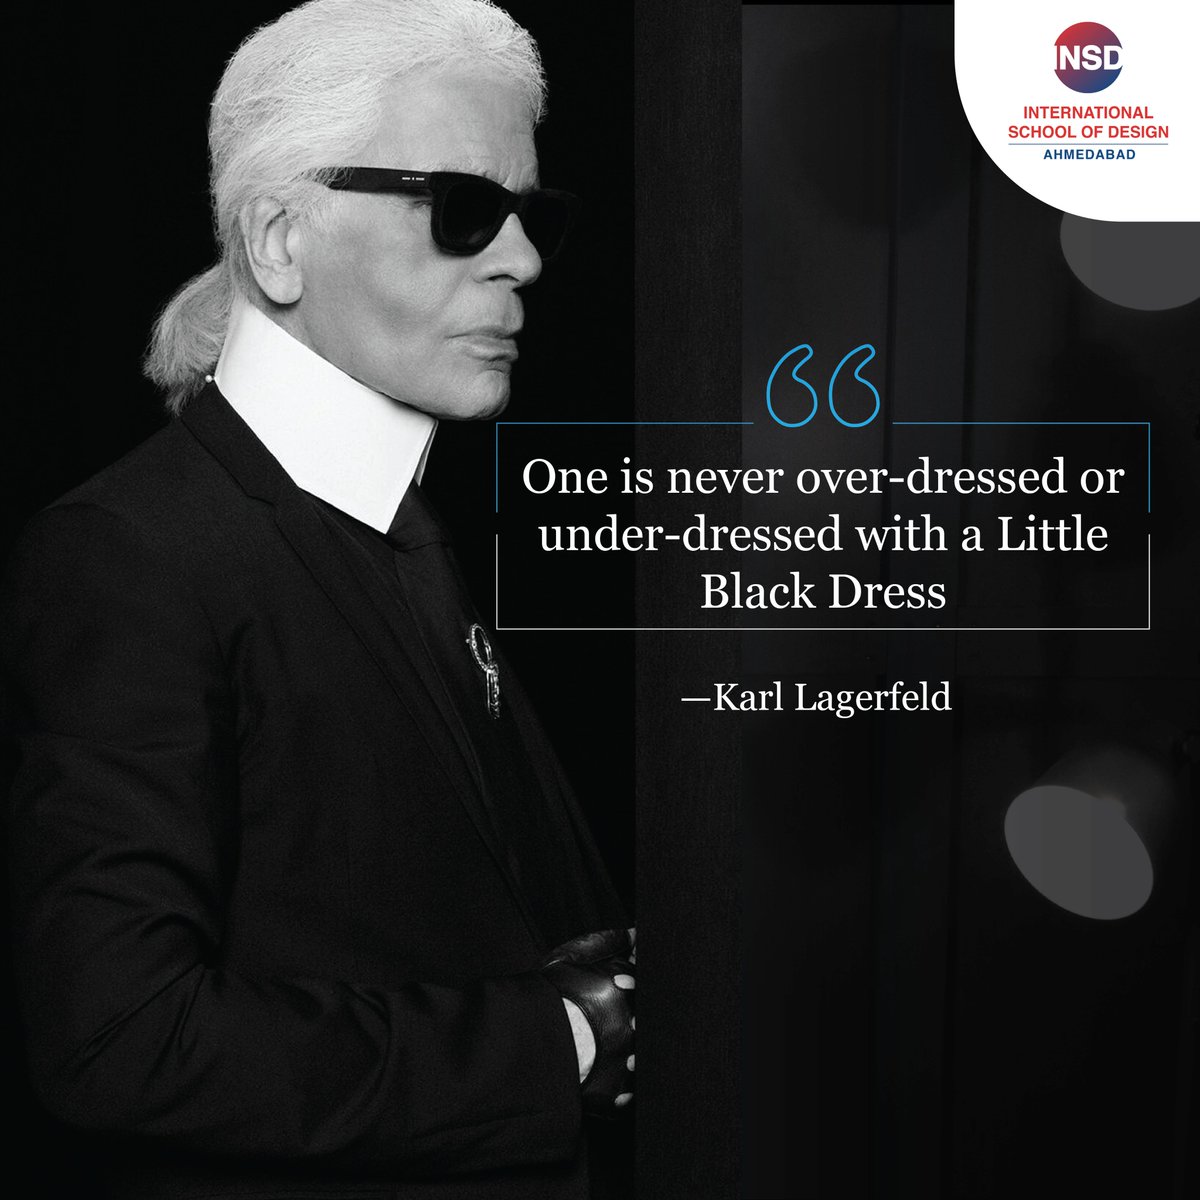 One is never over-dressed or under-dressed with a Little Black Dress.' —Karl Lagerfeld #fashionquotes #quoteoftheday #fashiondesign #fashiondesigner #fashionstatements #insdahmedabad #ahmedabad #gujarat #designinstitute #fashionmotivation